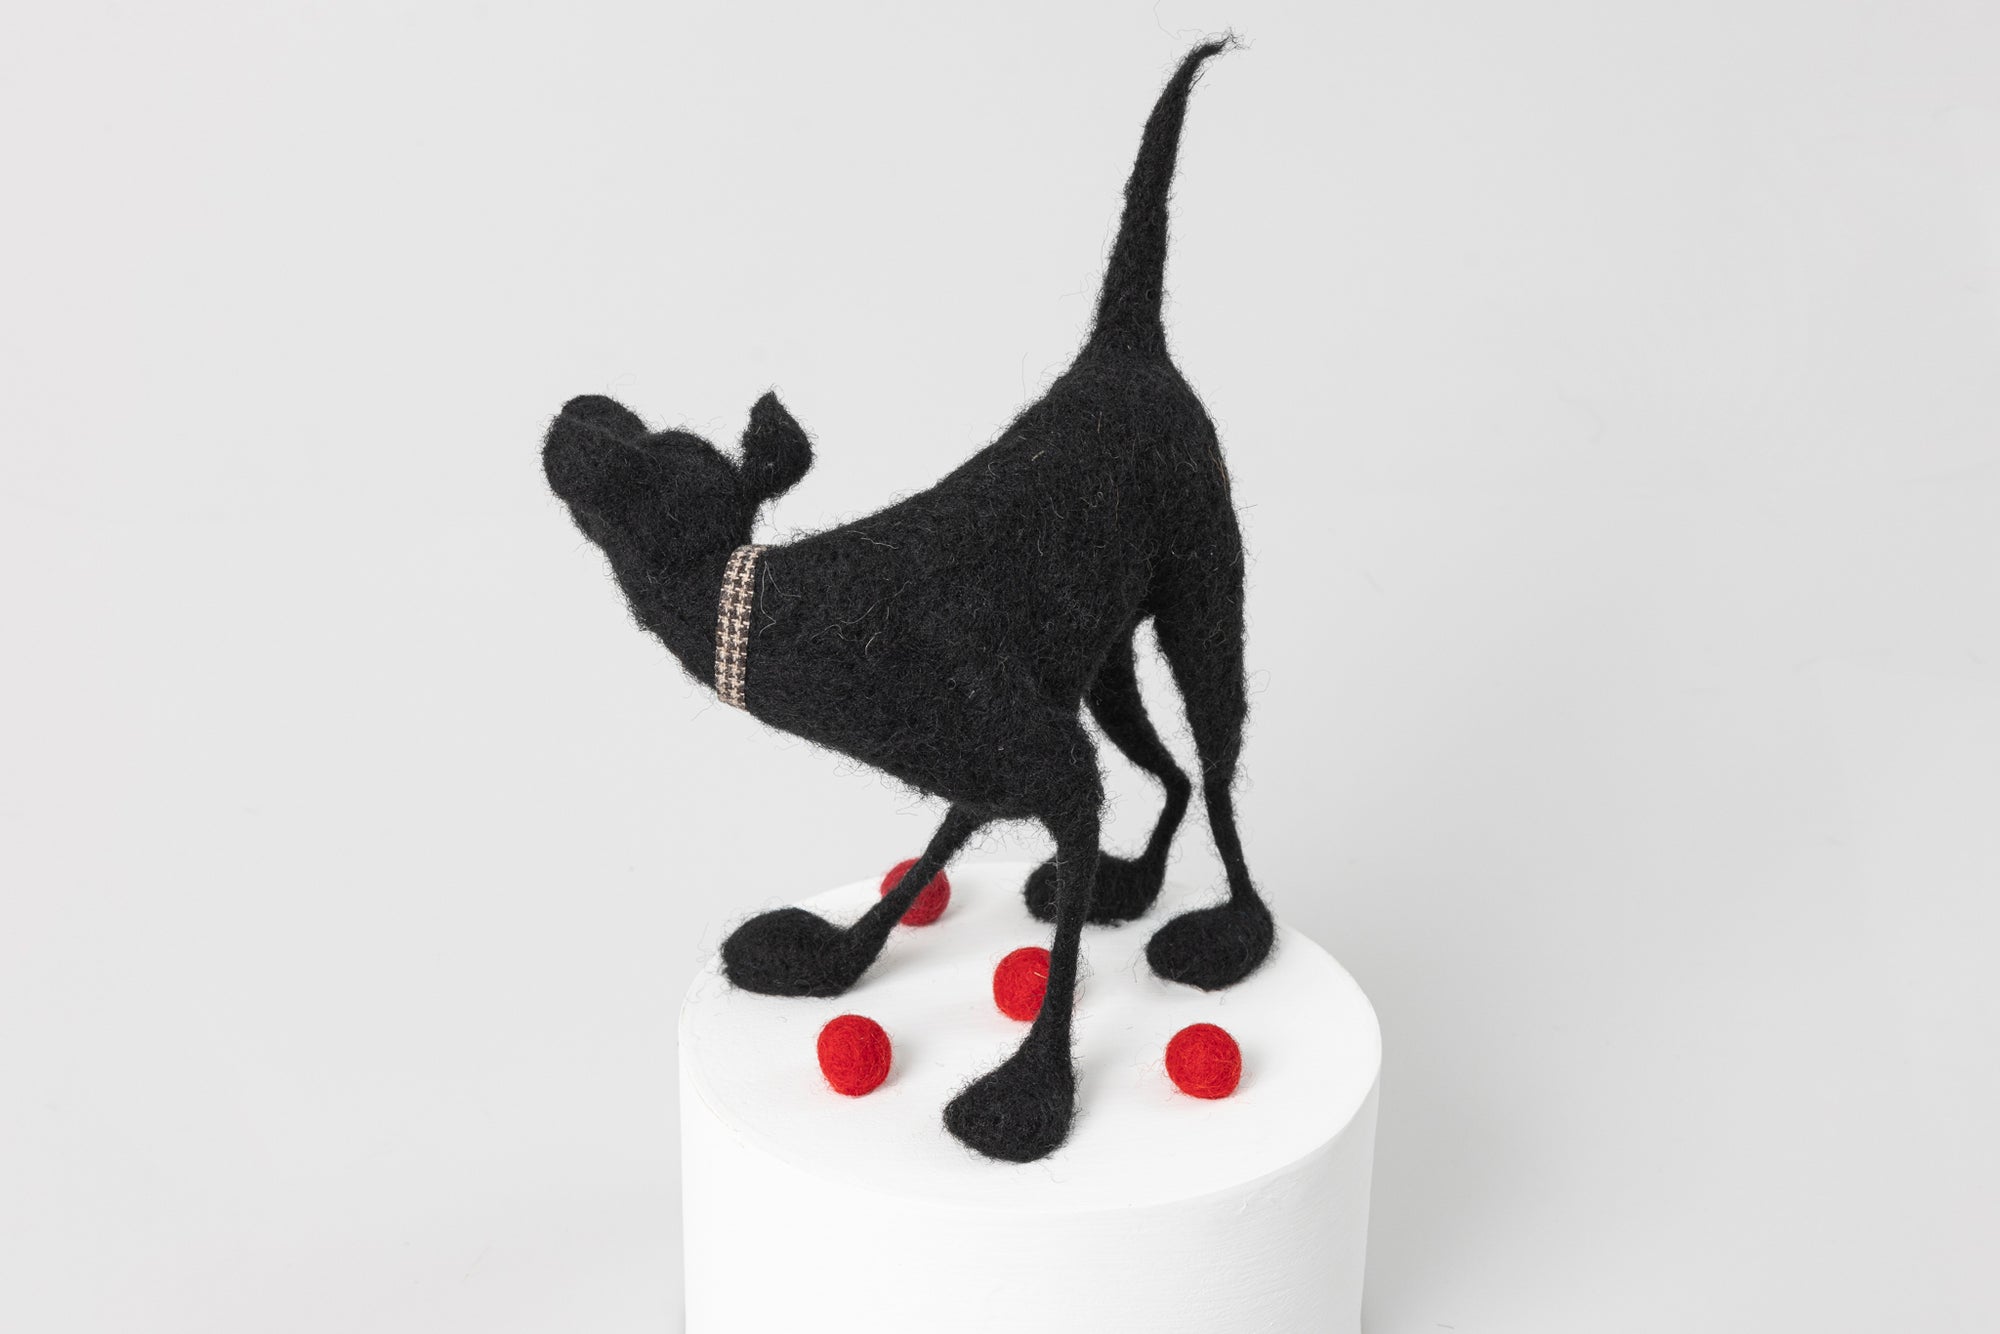 'Billy The Bugger' needlefelt character dog by Kate Toms, available at Padstow Gallery, Cornwall